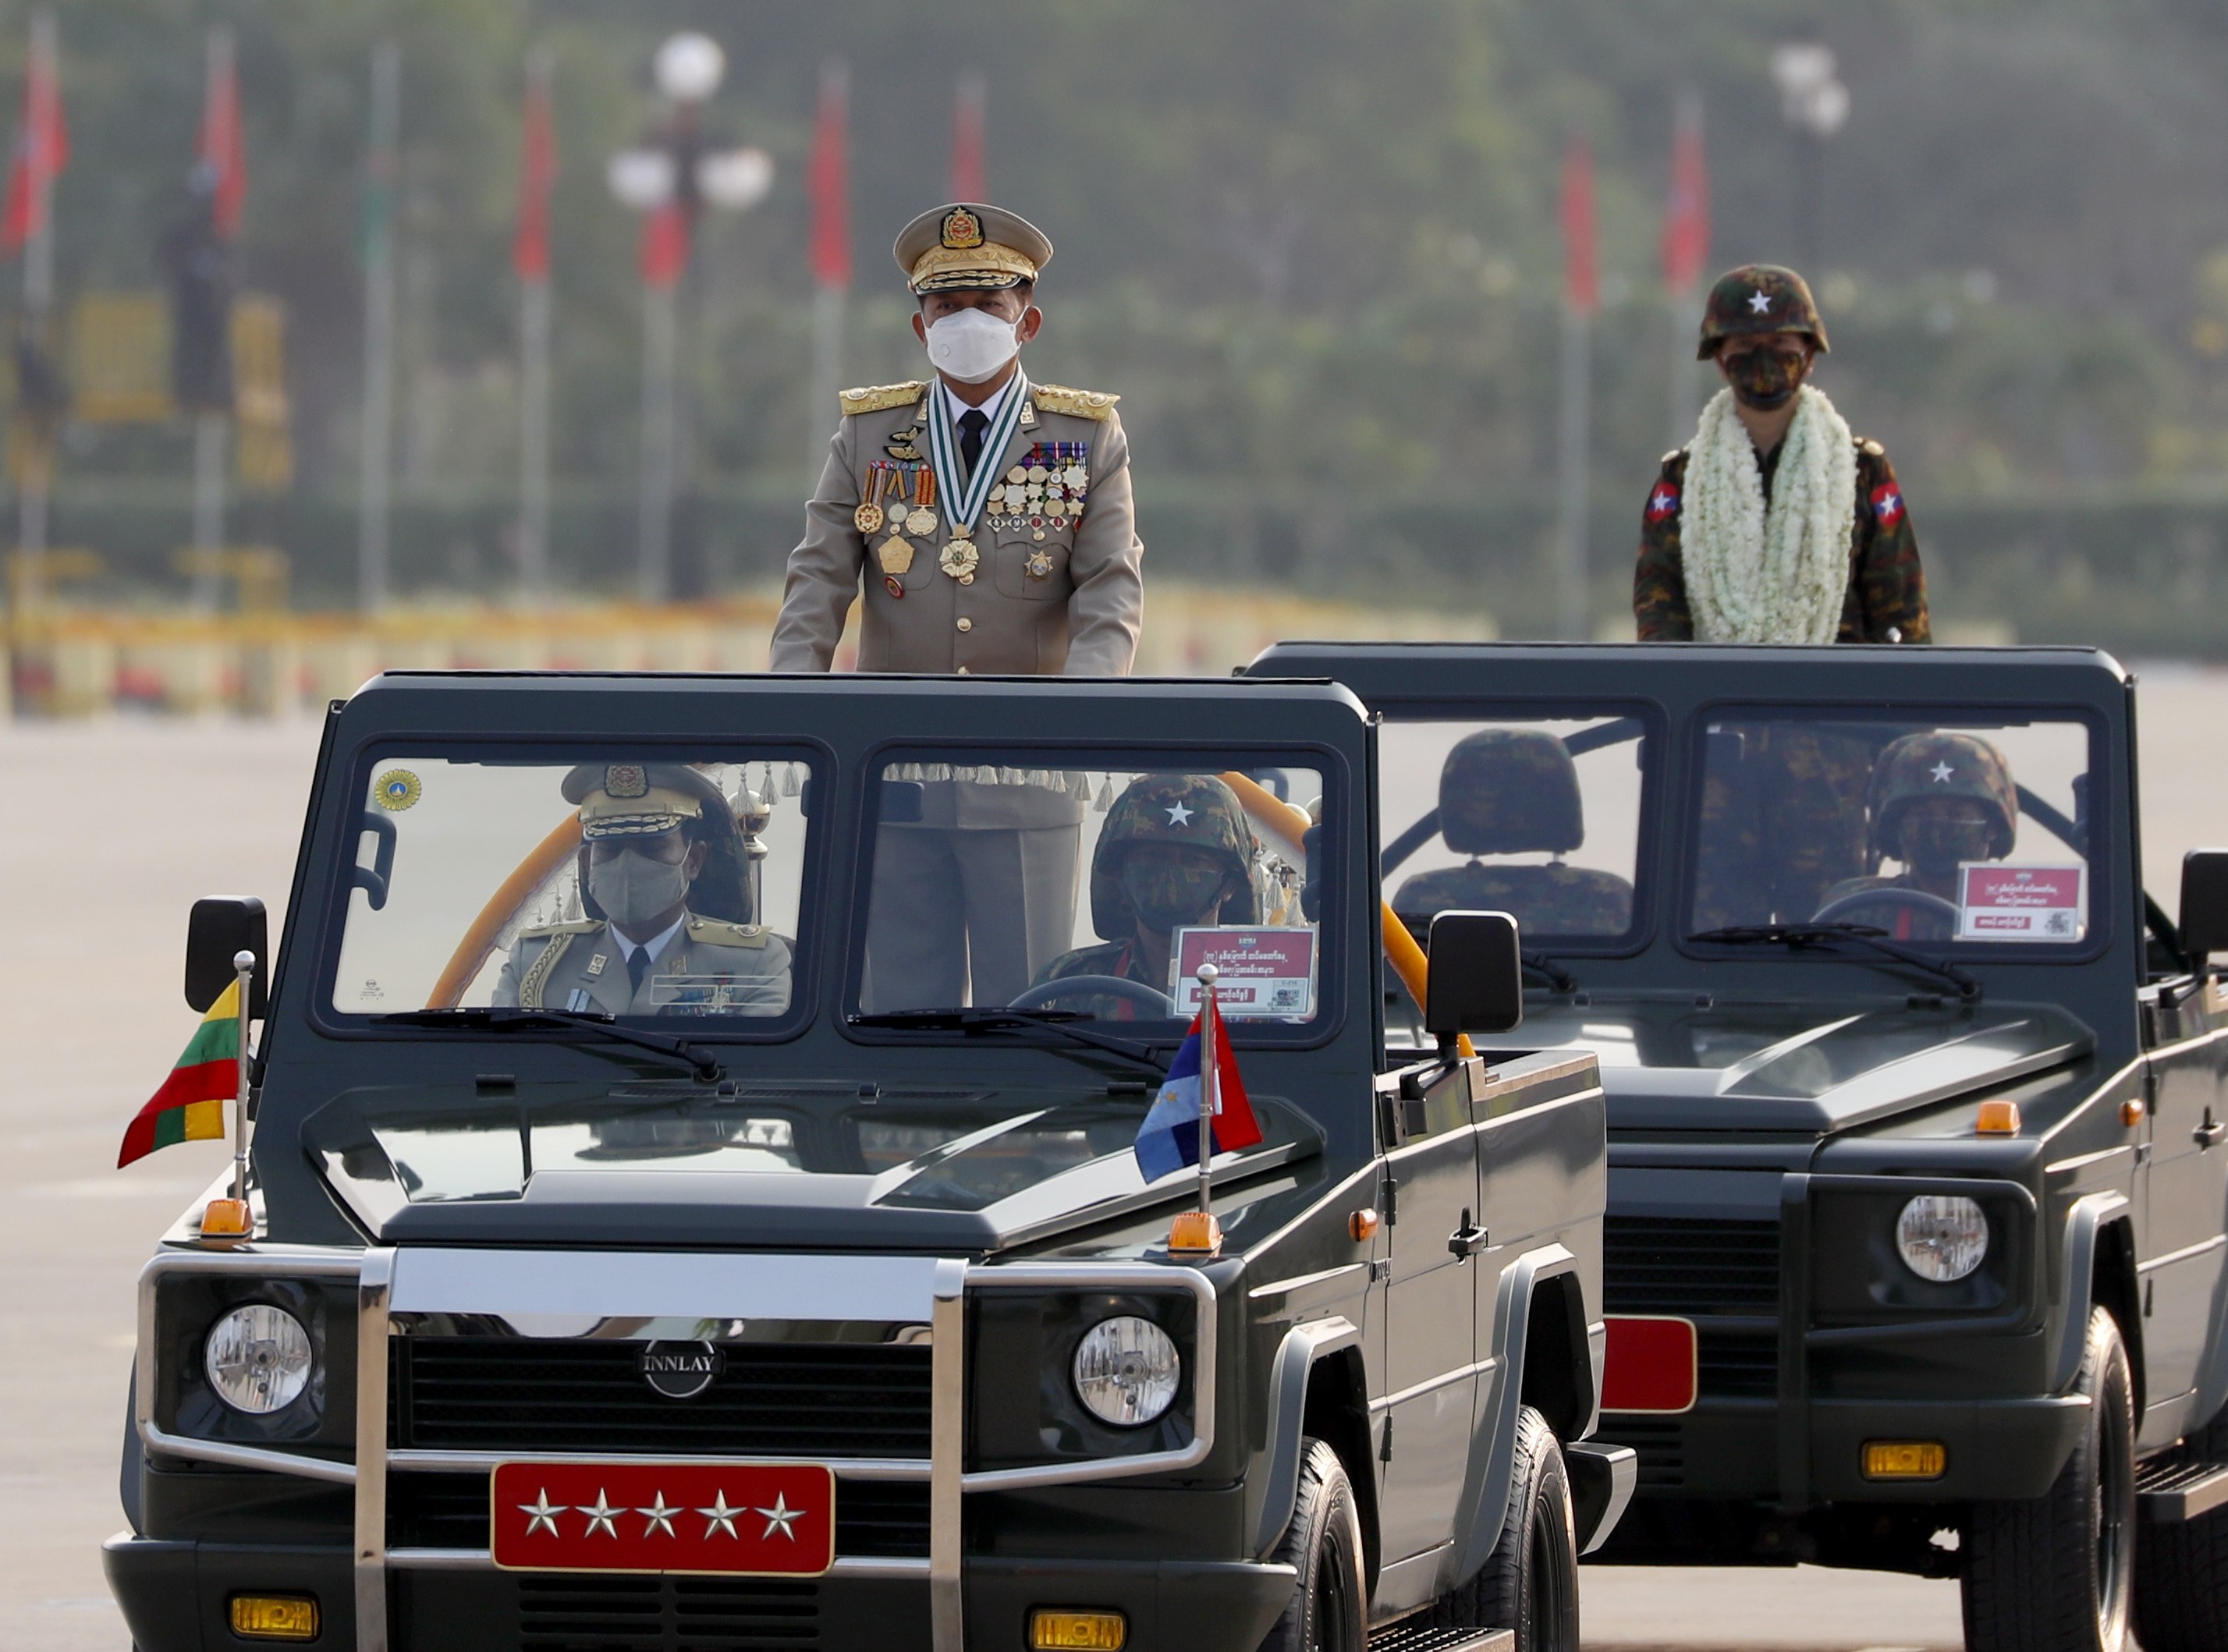 Myanmar military Commander-in-Chief Senior General Min Aung Hlaing at a parade to mark Armed Forces Day in Naypyidaw, Myanmar last year. Photo: EPA-EFE